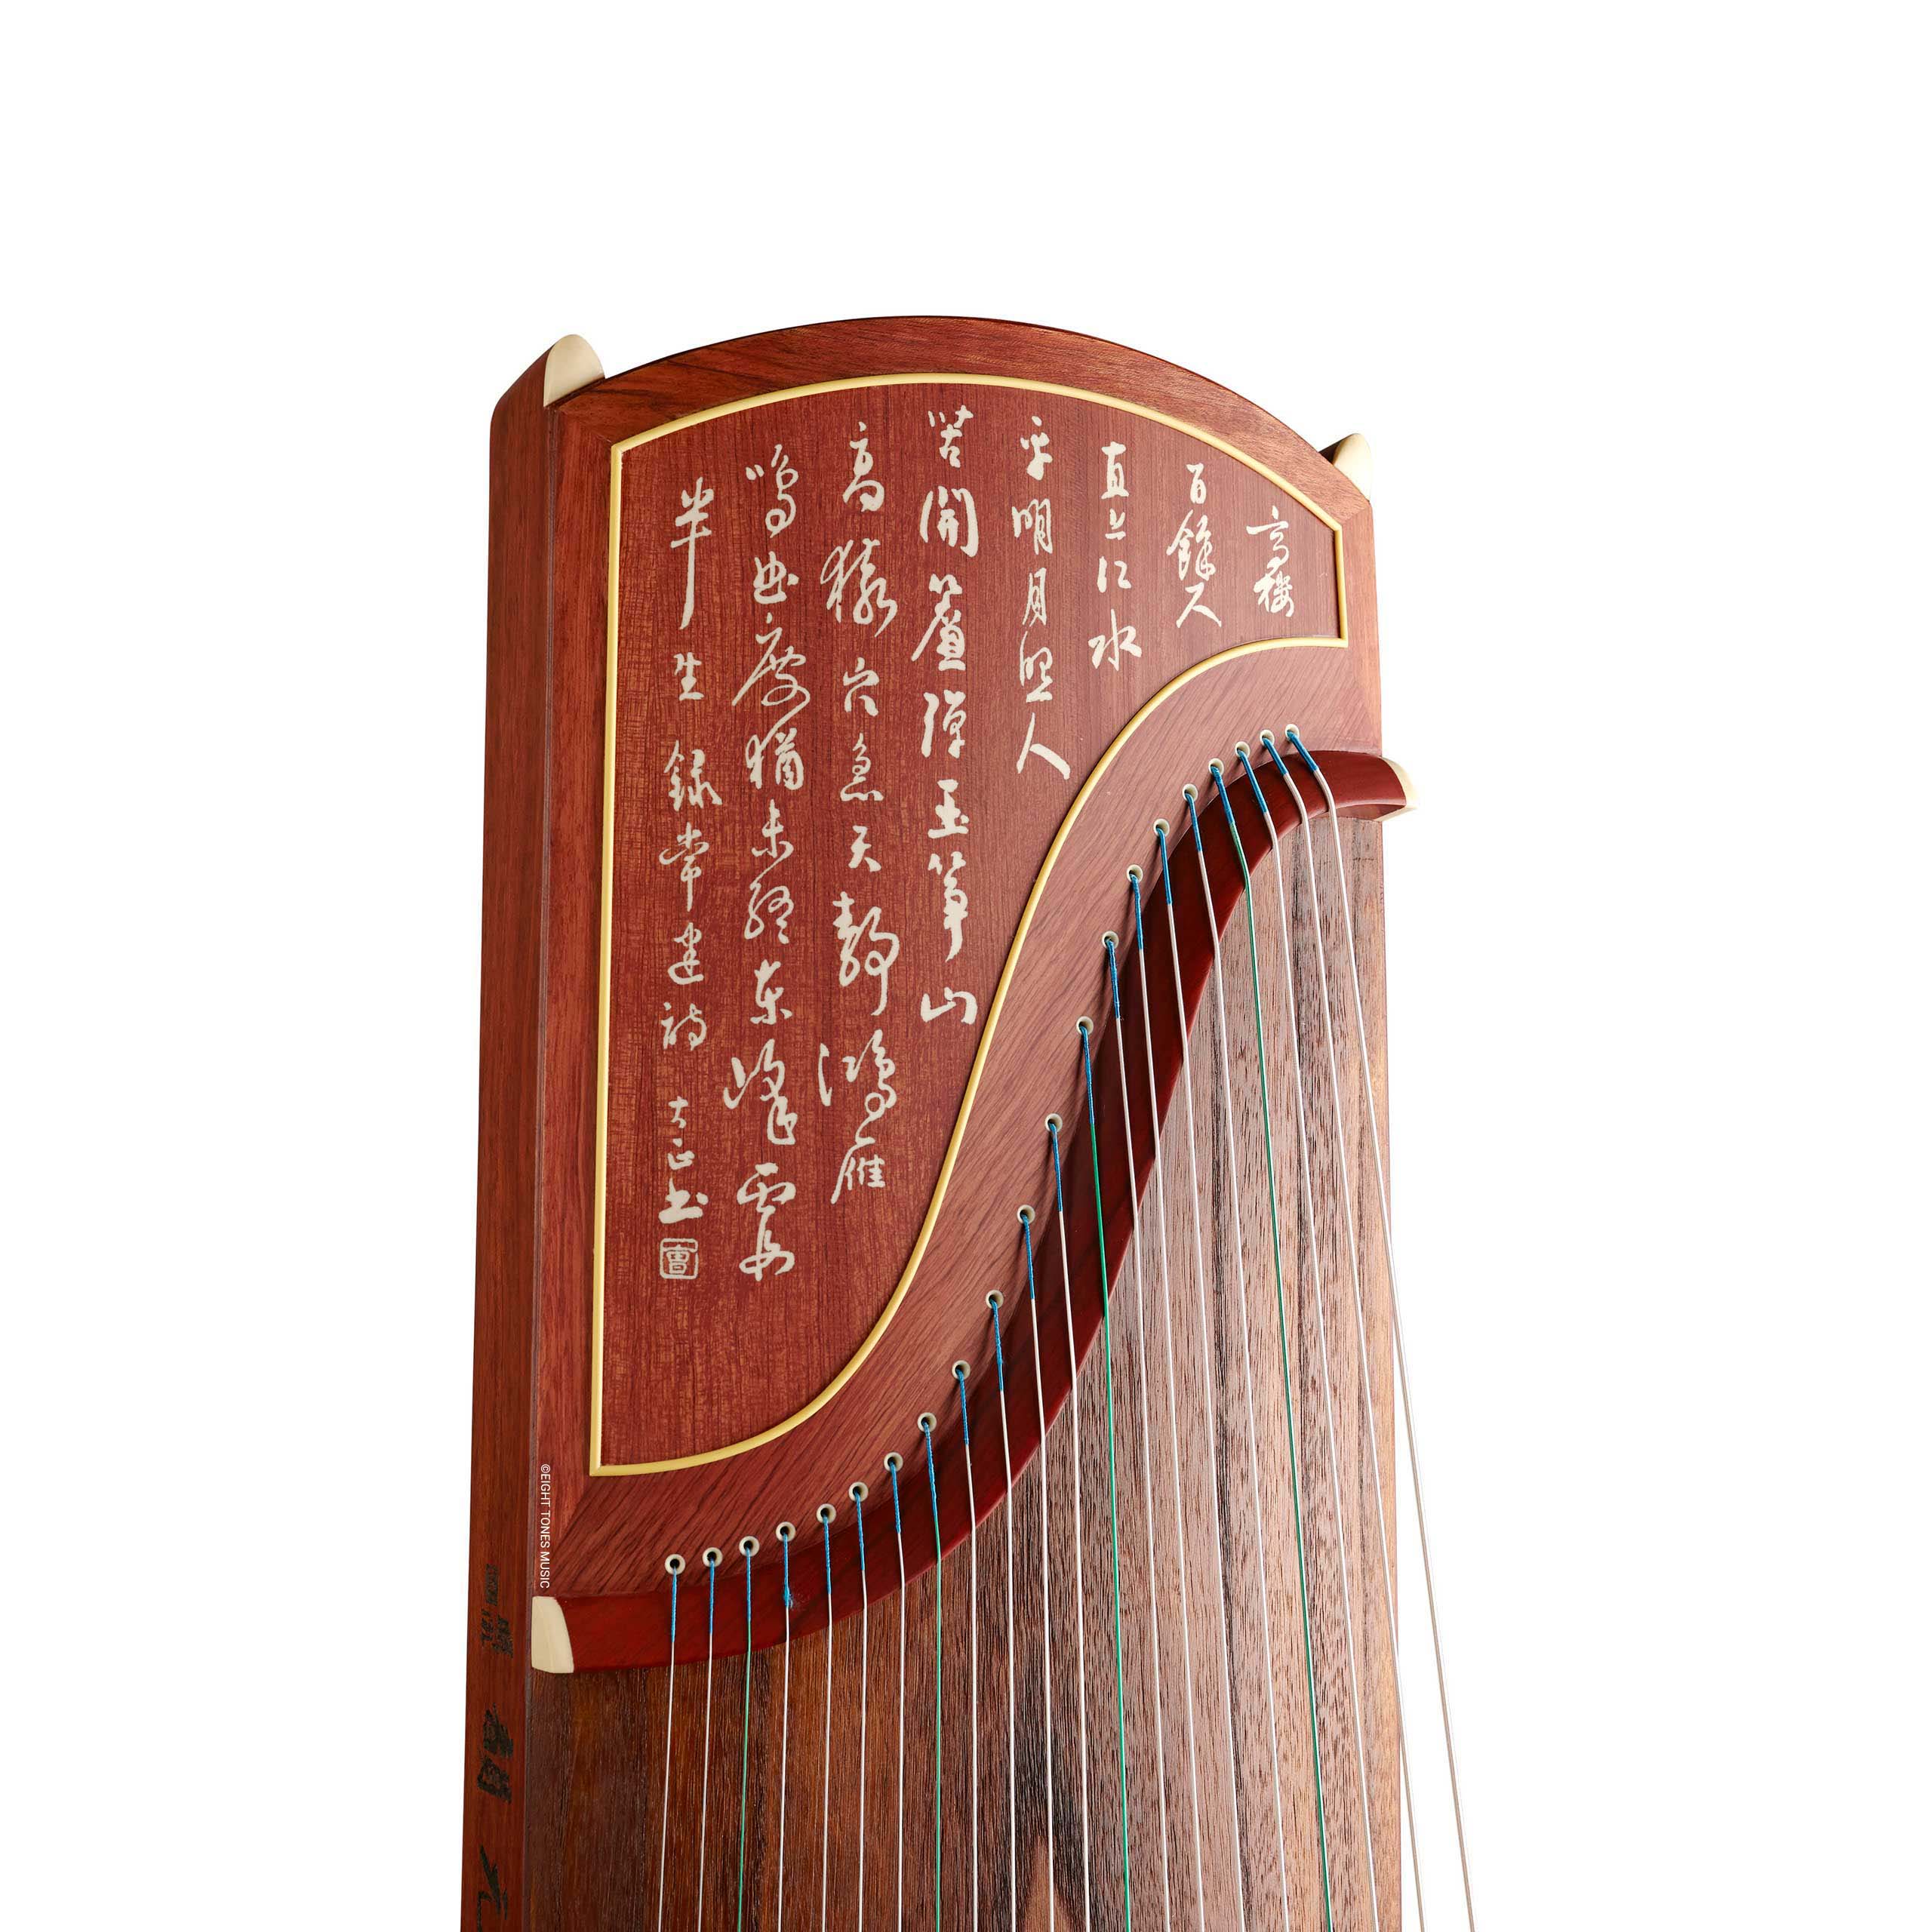 Dunhuang Yichang ‘Perfection in Innocence’ Rosewood Guzheng Tail